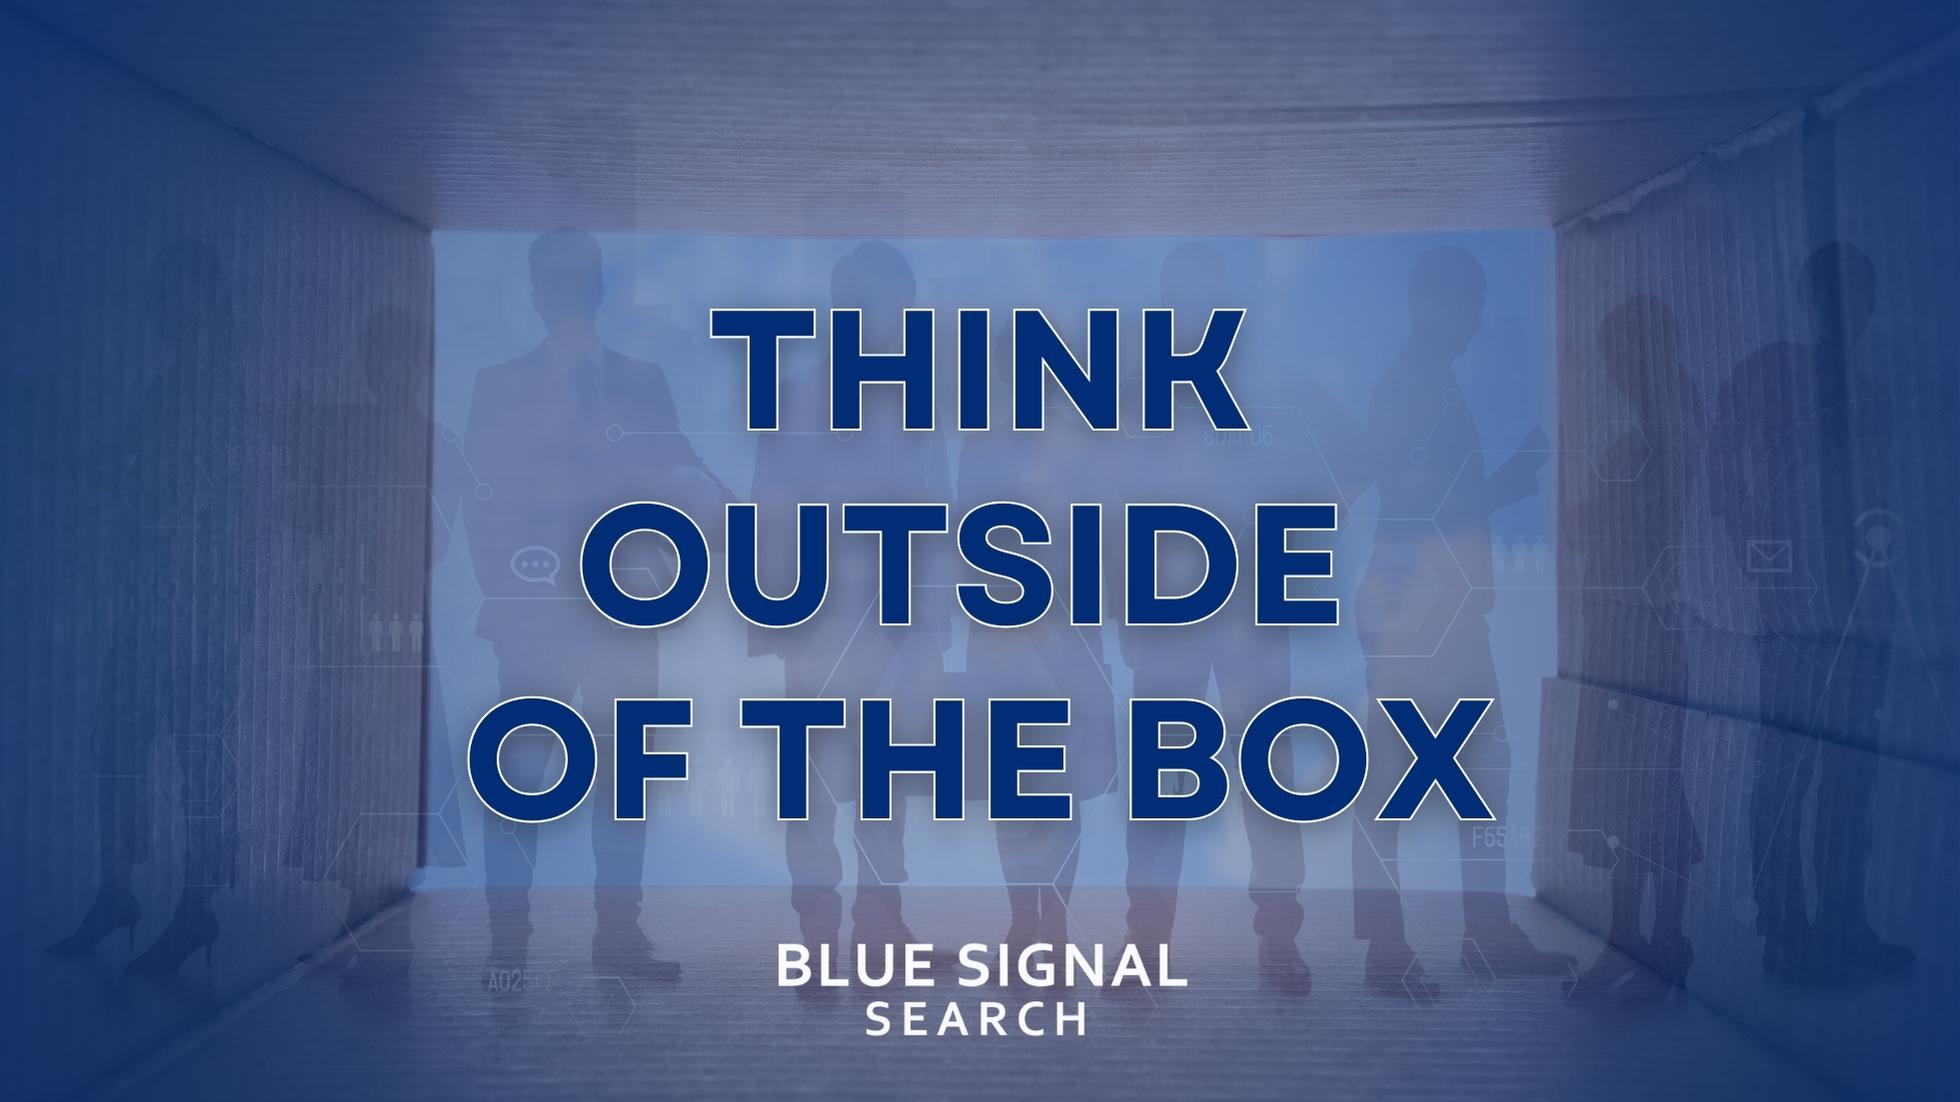 Image of an open box with the words "Think Outside Of The Box" displayed in the opening.